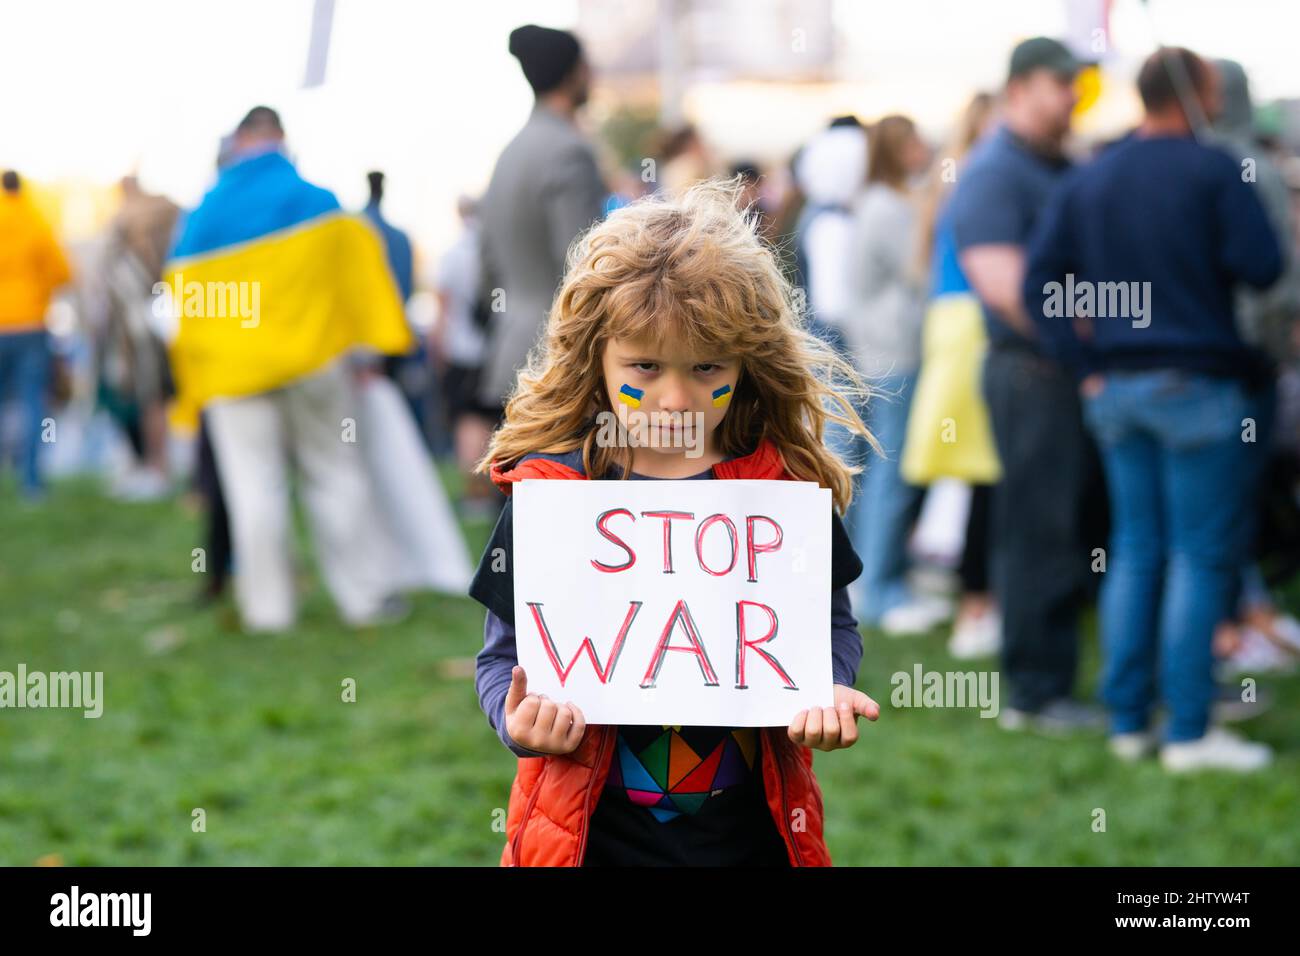 Young kid holding a poster with Stop war message, activism and human rights movement, outdoor lifestyle. Child carries a sign Stop war. Russian Stock Photo